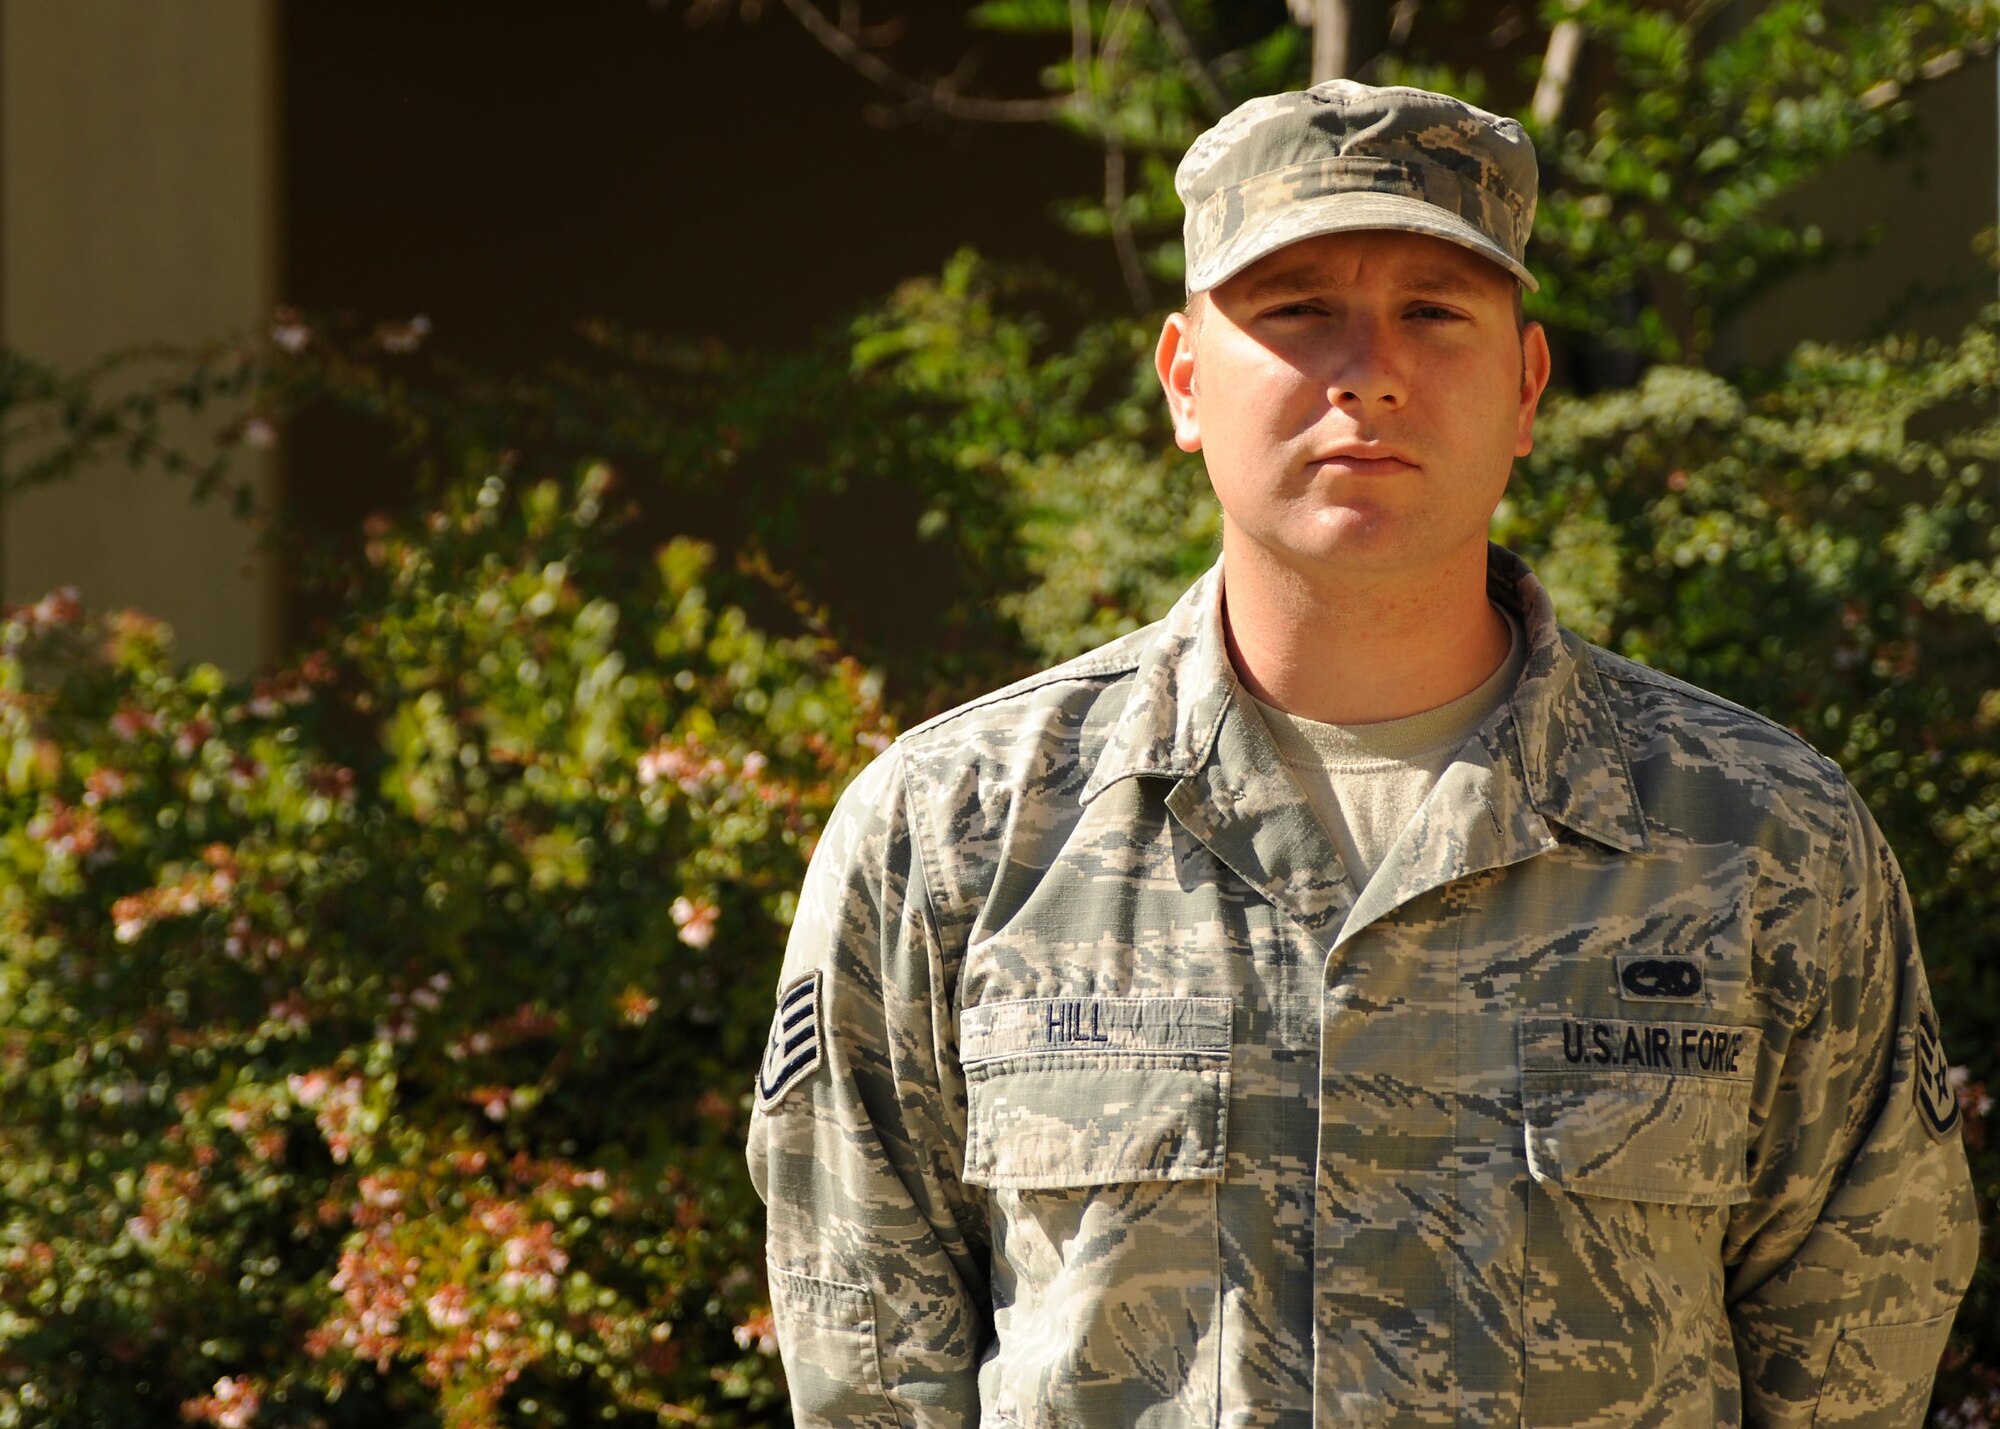 Staff Sgt. Daniel Hill, 9th Civil Engineer Squadron Airman Dormitory Leader, poses for a photo August 3, 2016, at Beale Air Force Base, California. (U.S. Air Force photo by Airman Tristan D. Viglianco)